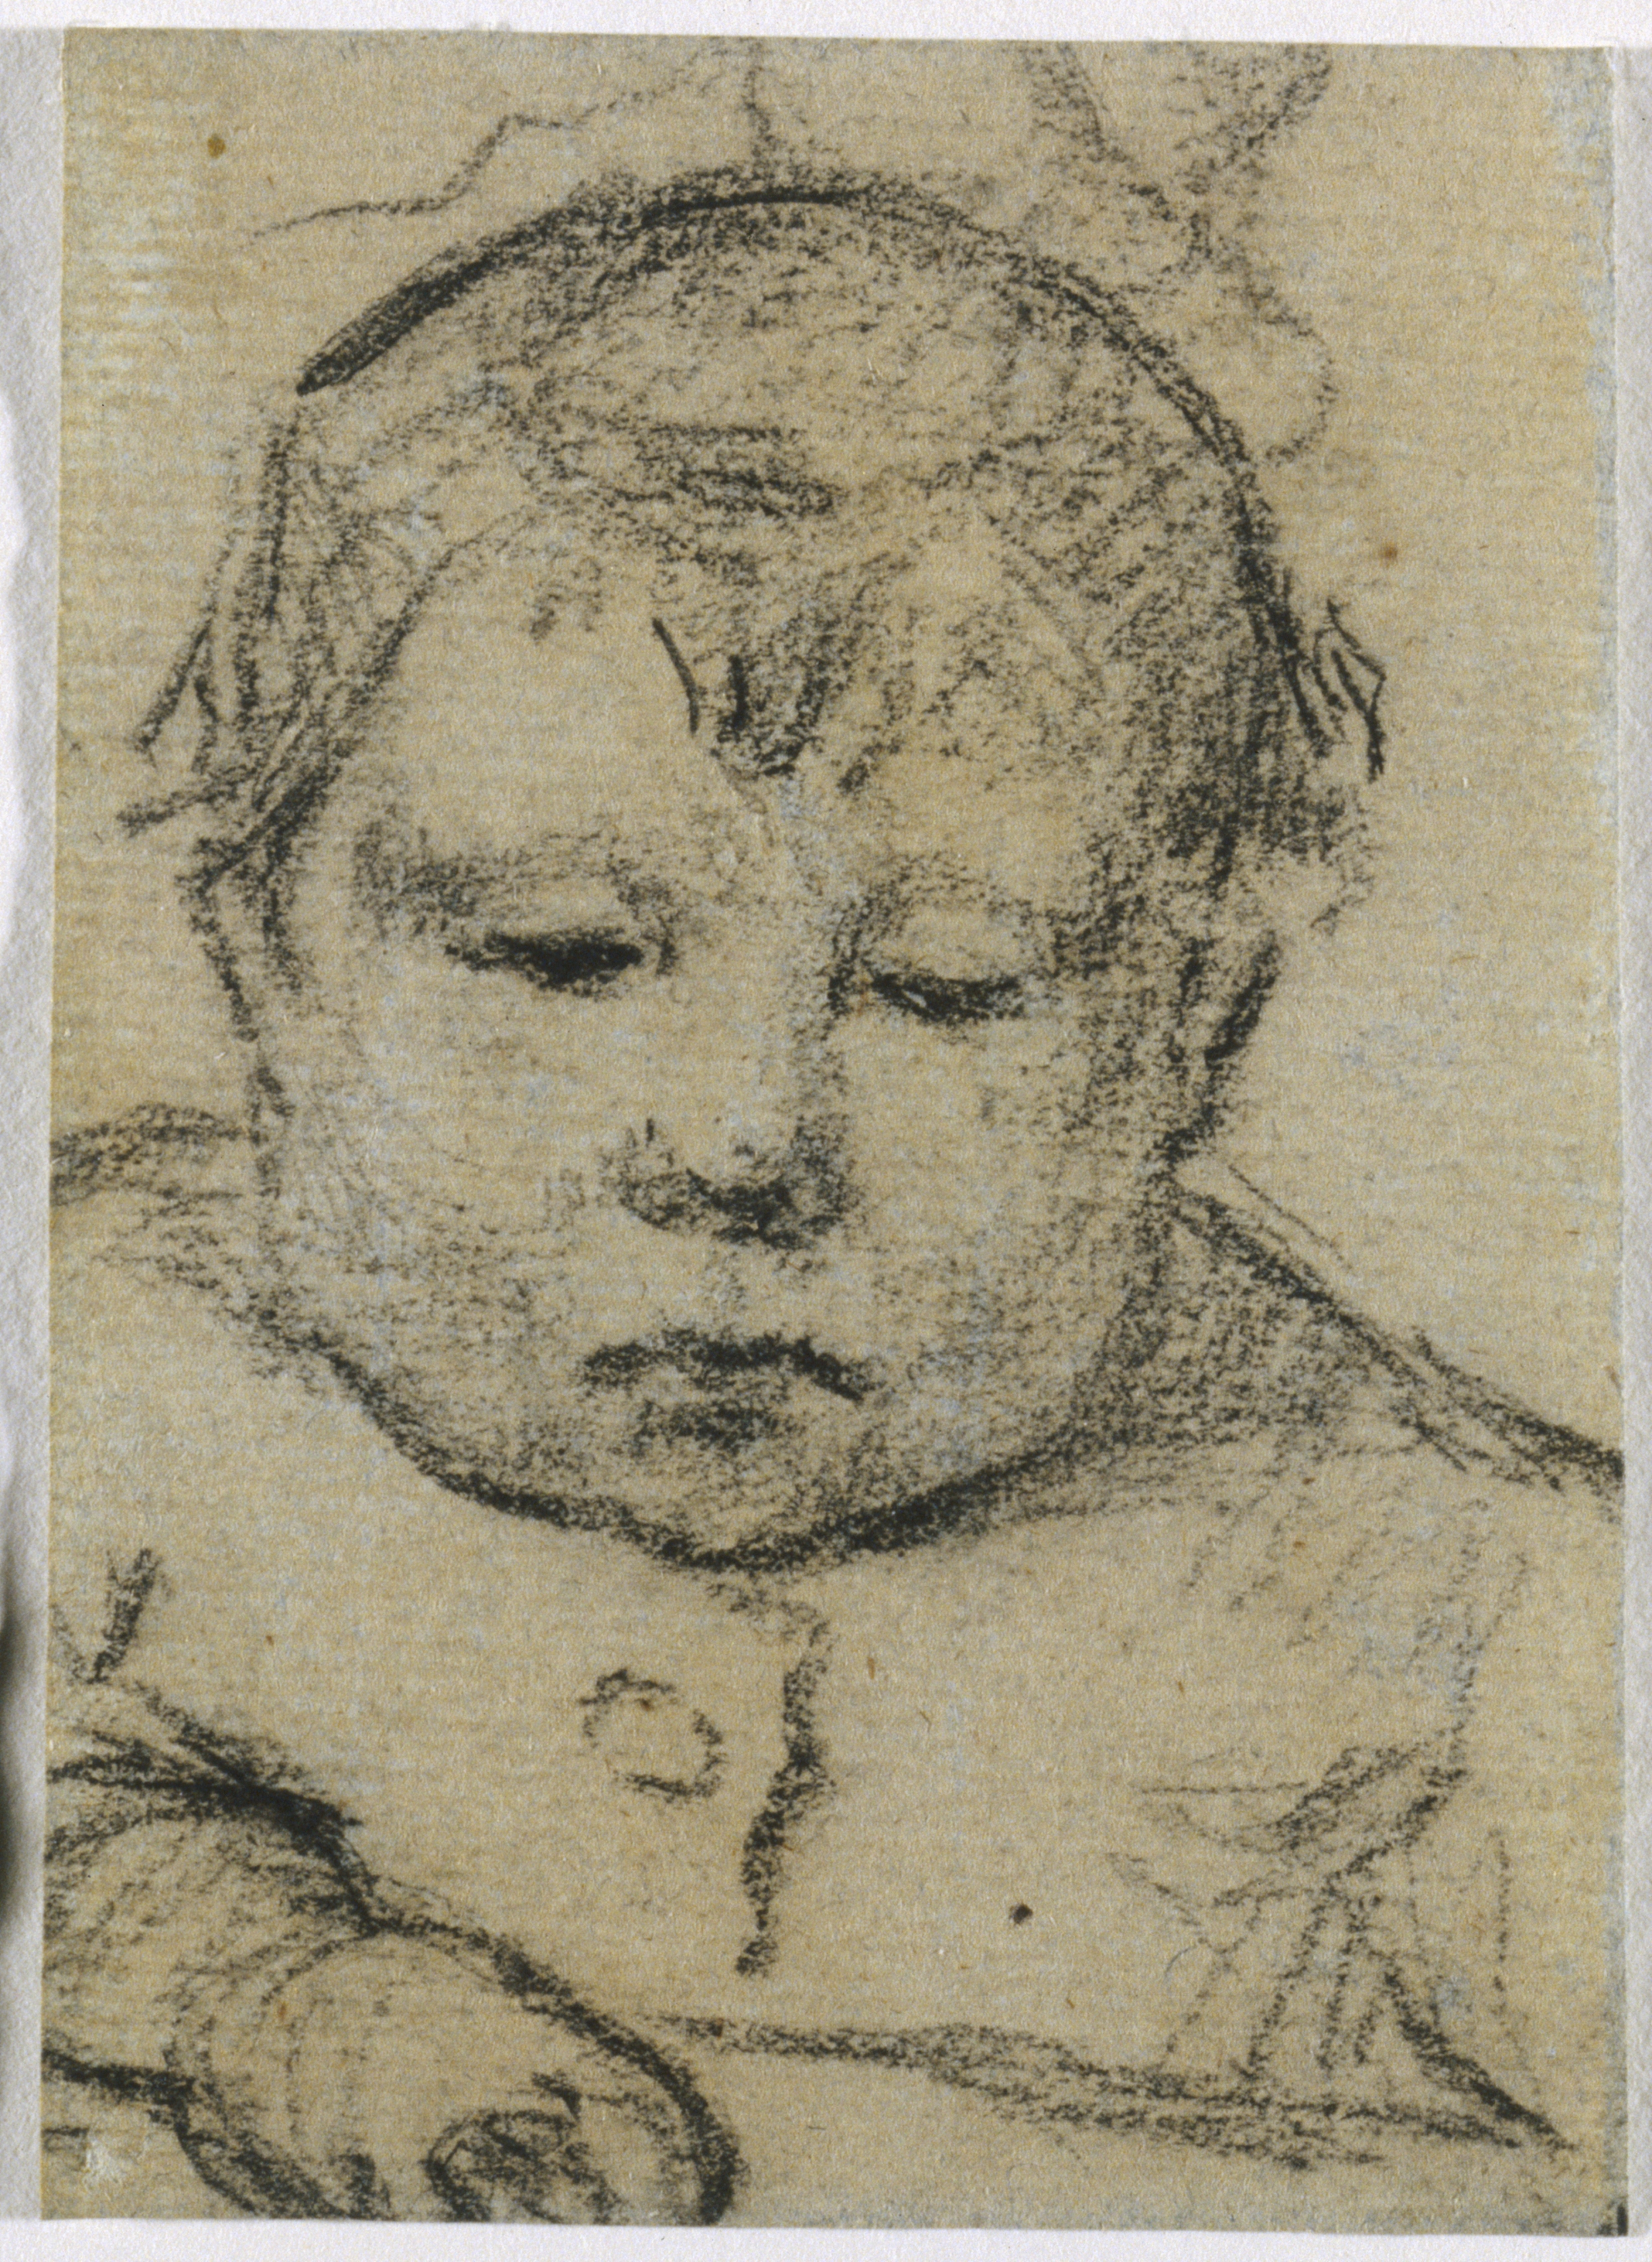 Emil Gauguin as a Child, Right Hand Forward